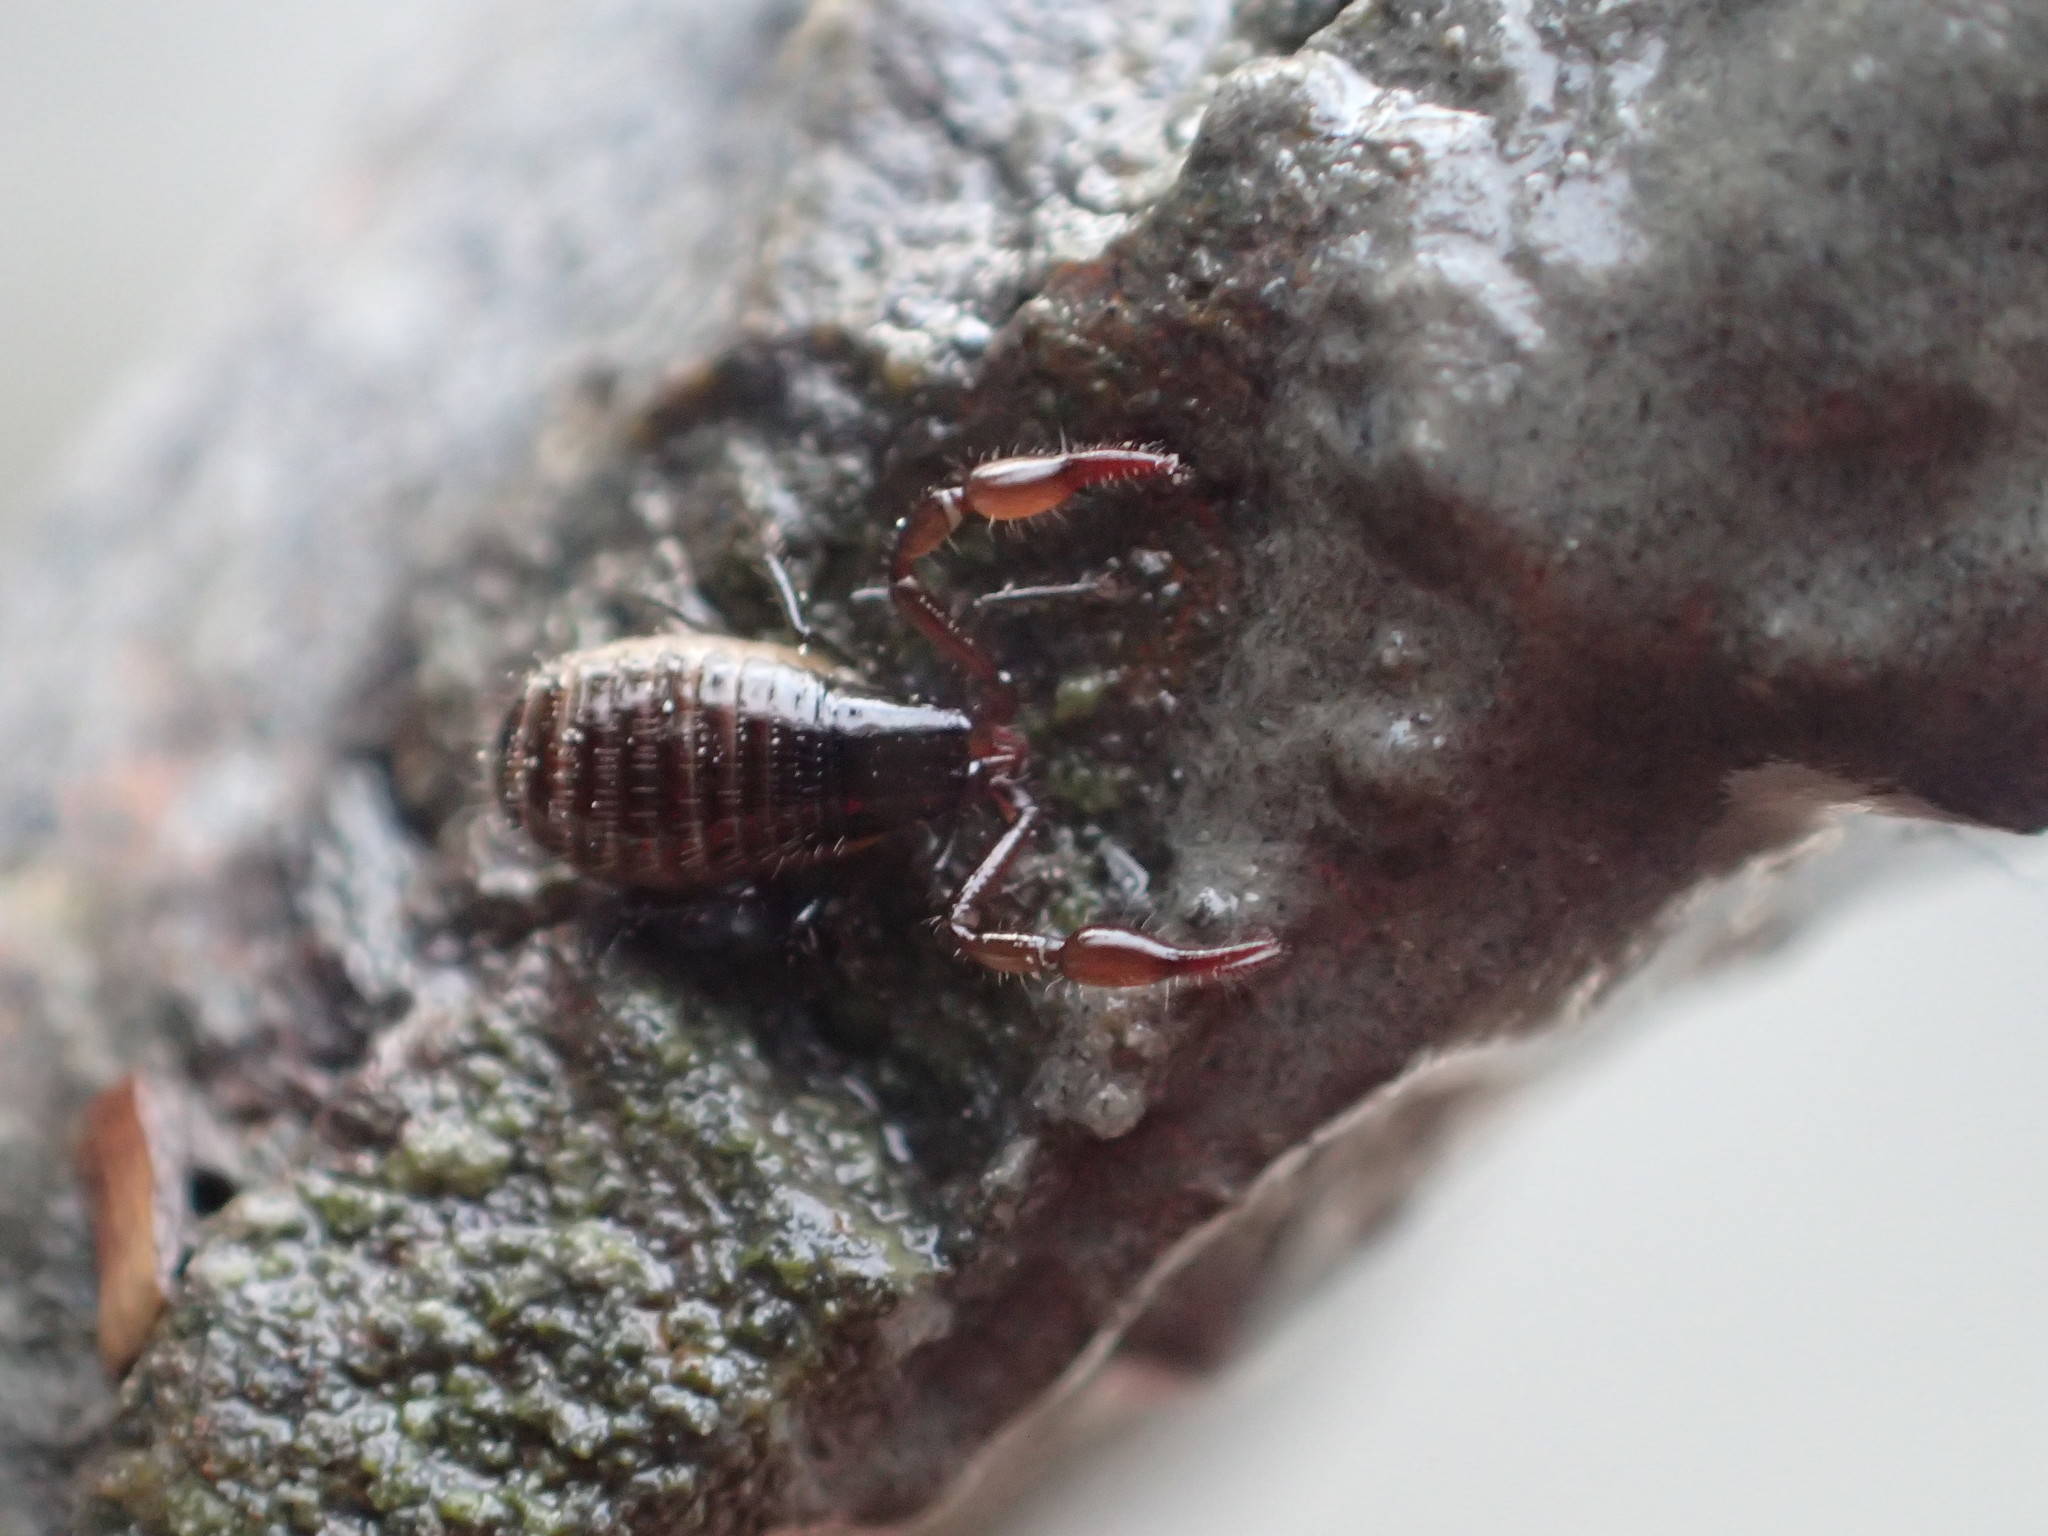 The Intertidal Psuedoscorpion, Halobisium occidentale, is the second species of pseudoscorpion to be documented on the Kenai National Wildlife Refuge. (Photo courtesy Kenai National Wildlife Refuge)